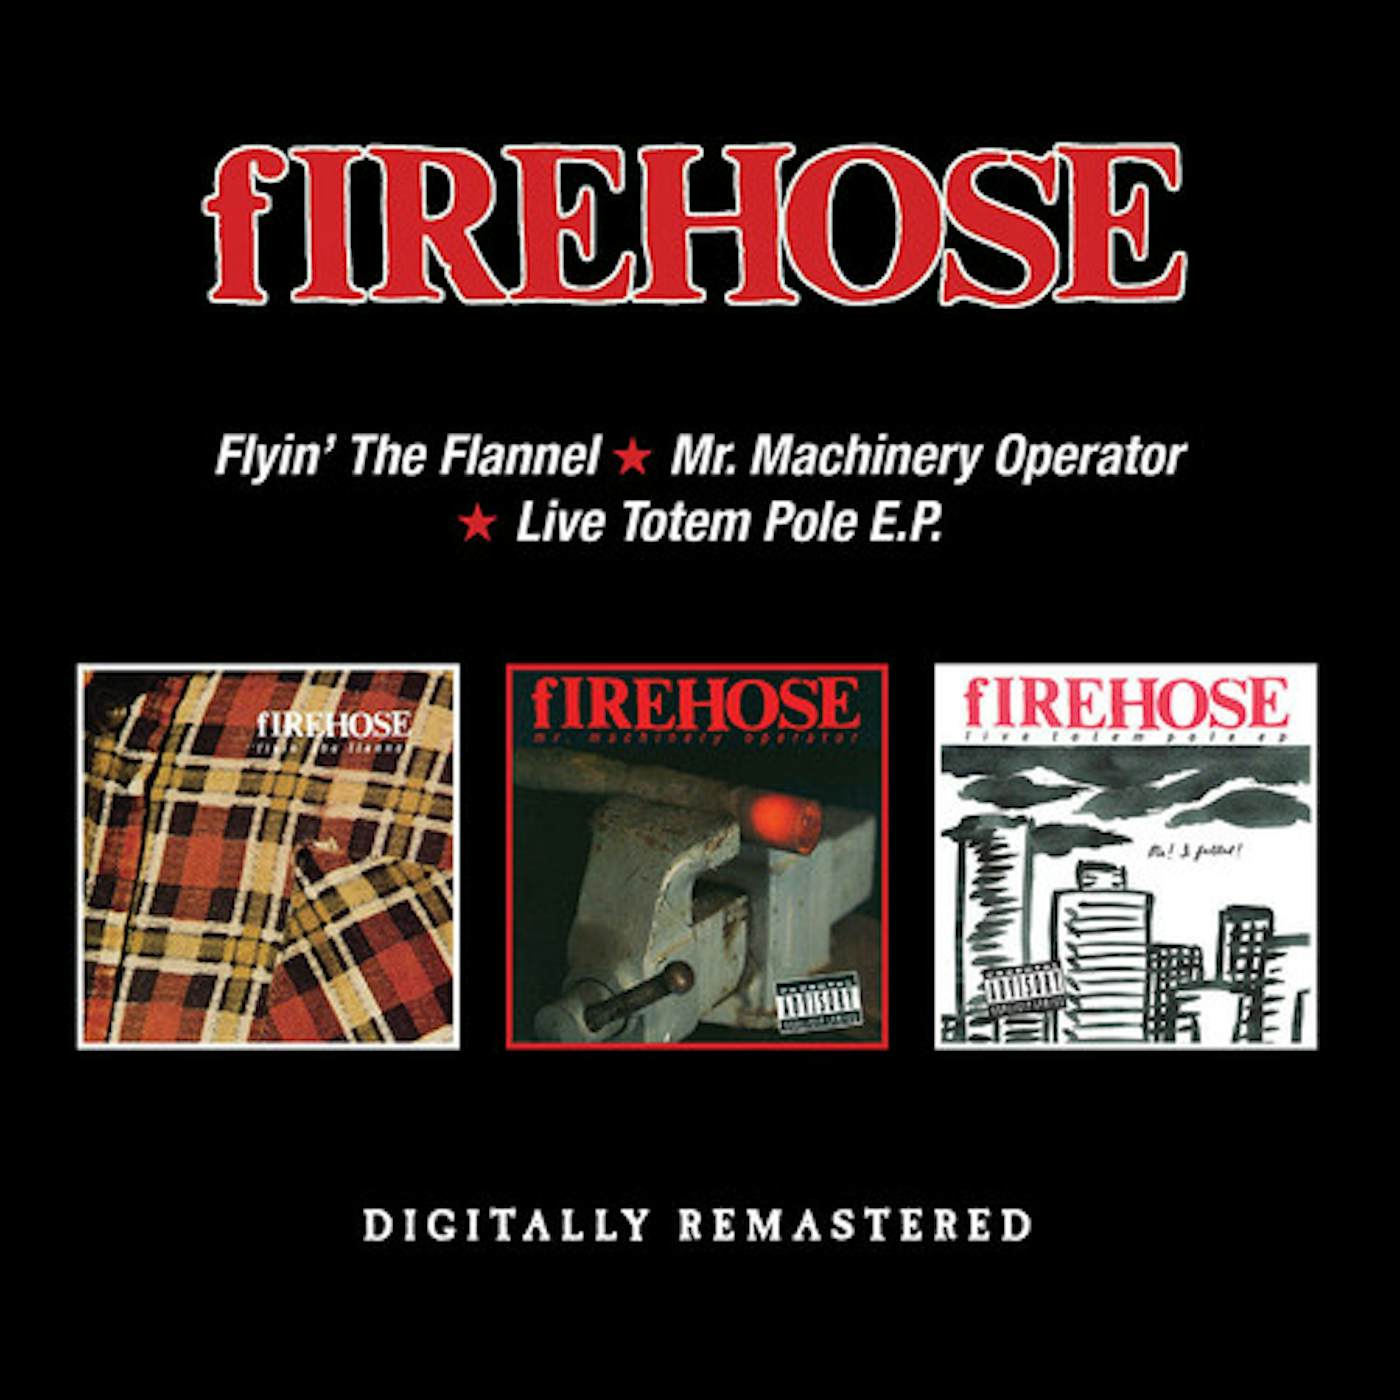 fIREHOSE FLYIN THE FLANNEL / MR MACHINERY OPERATOR / LIVE CD